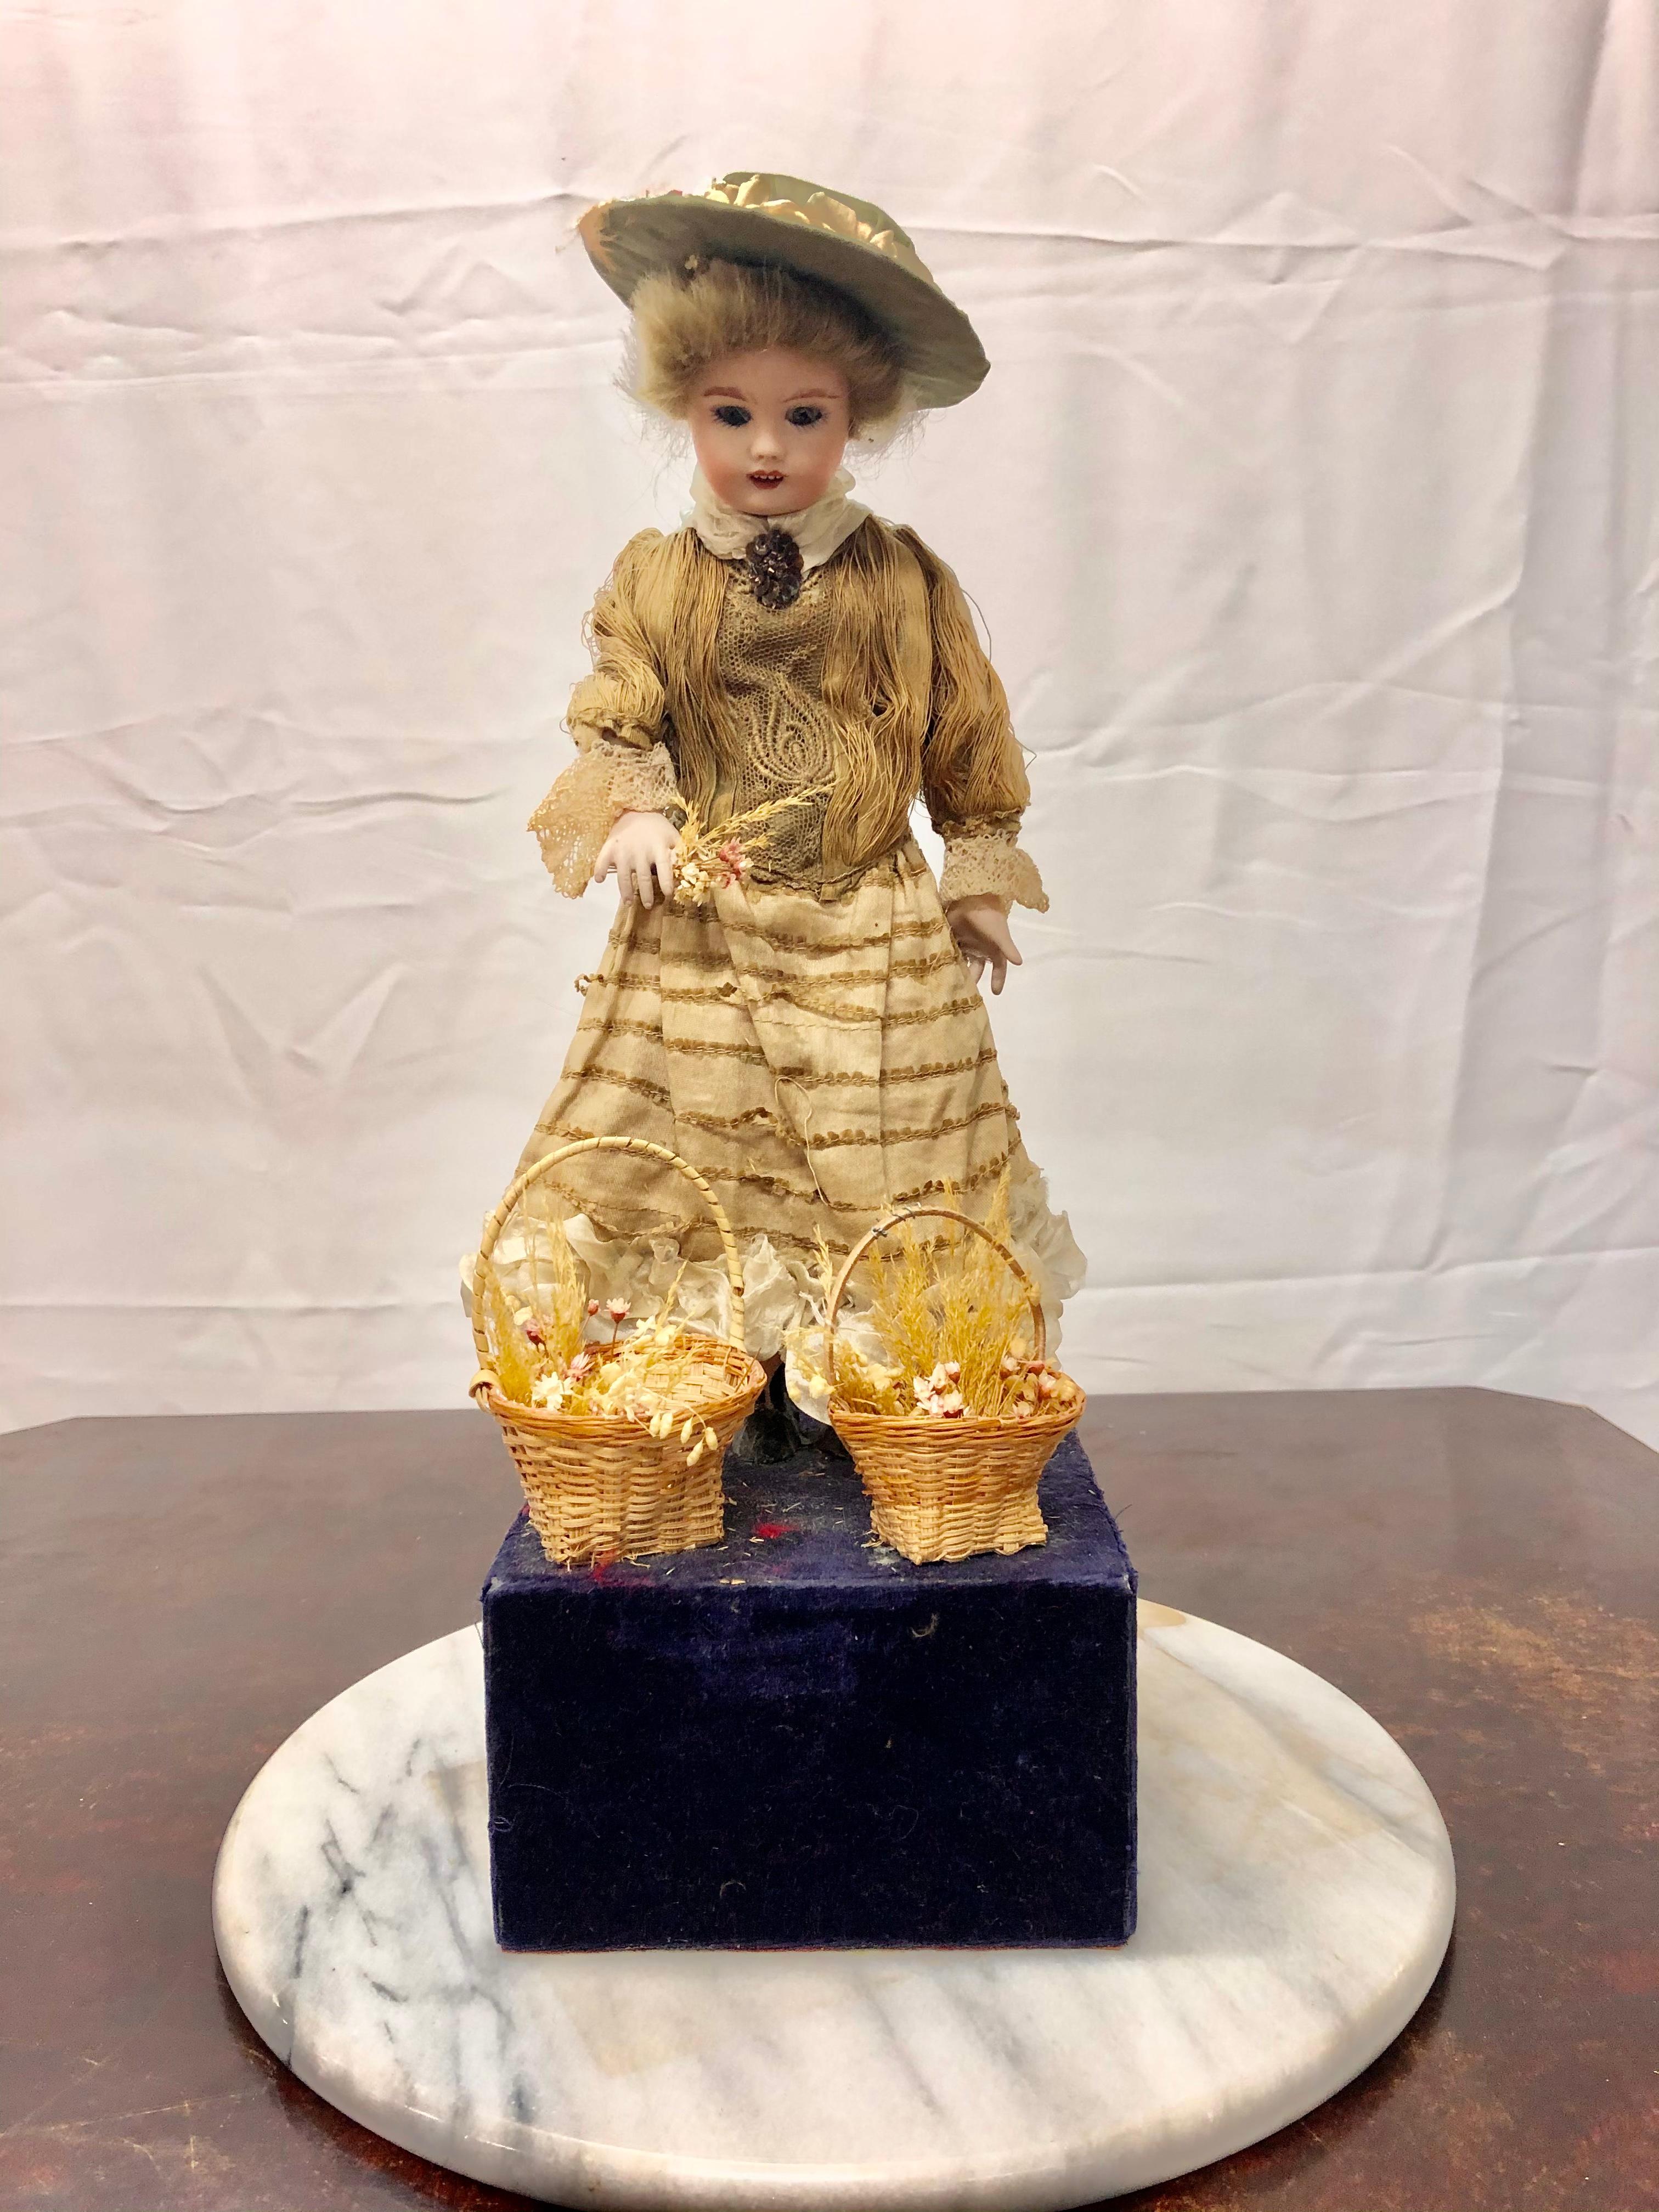 Fabulous rare 19th century automaton. Most likely made in France at the end of the 19th century. She is a real beauty and in remarkable condition for her age. She is made of porcelain and cloth. When you wind her she bends her head and raises